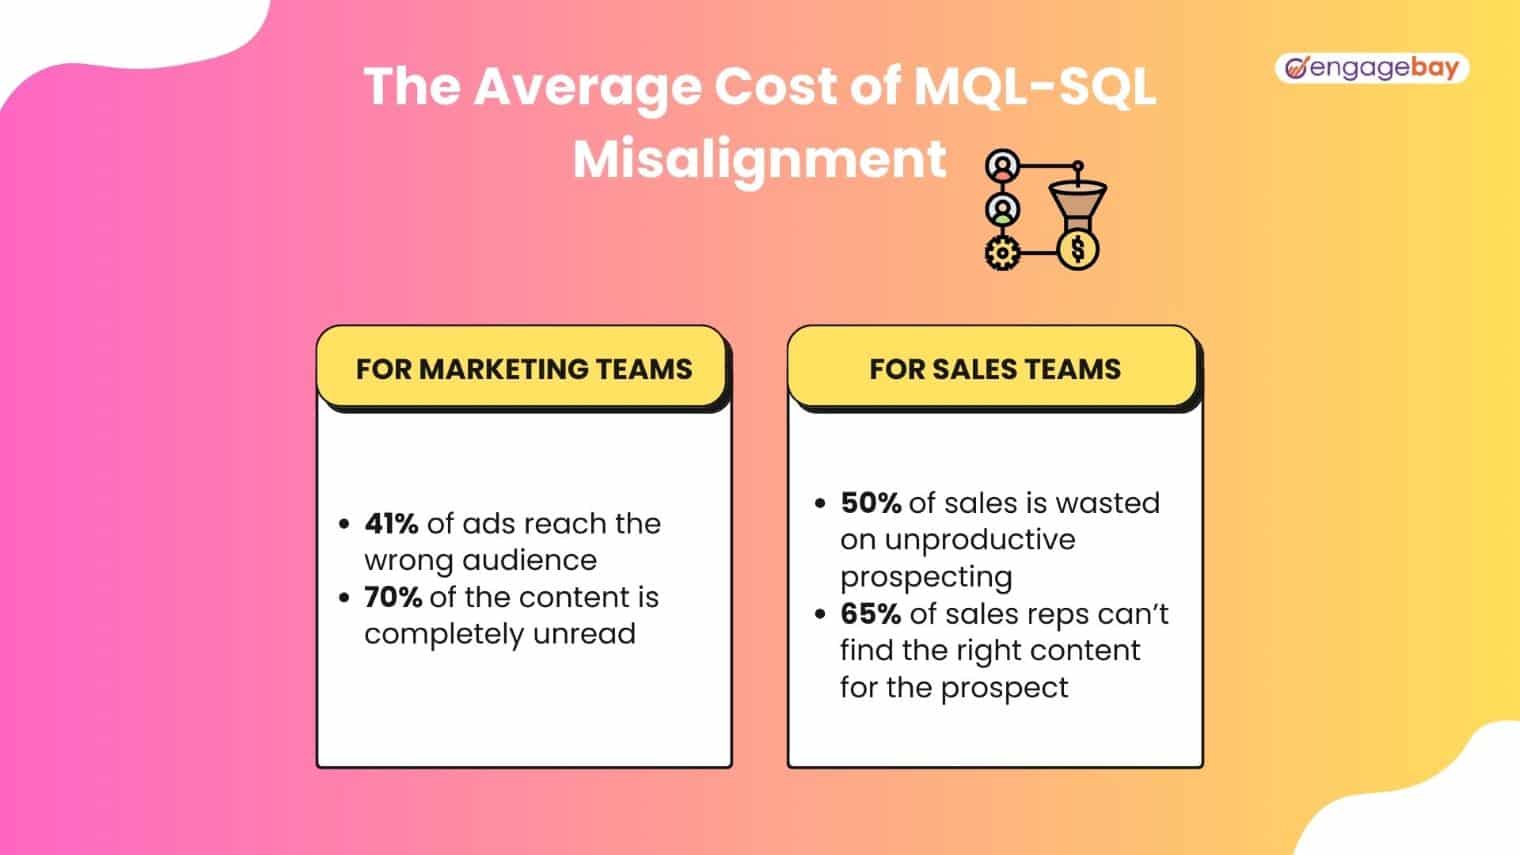 sales and marketing misalignment infographic for data